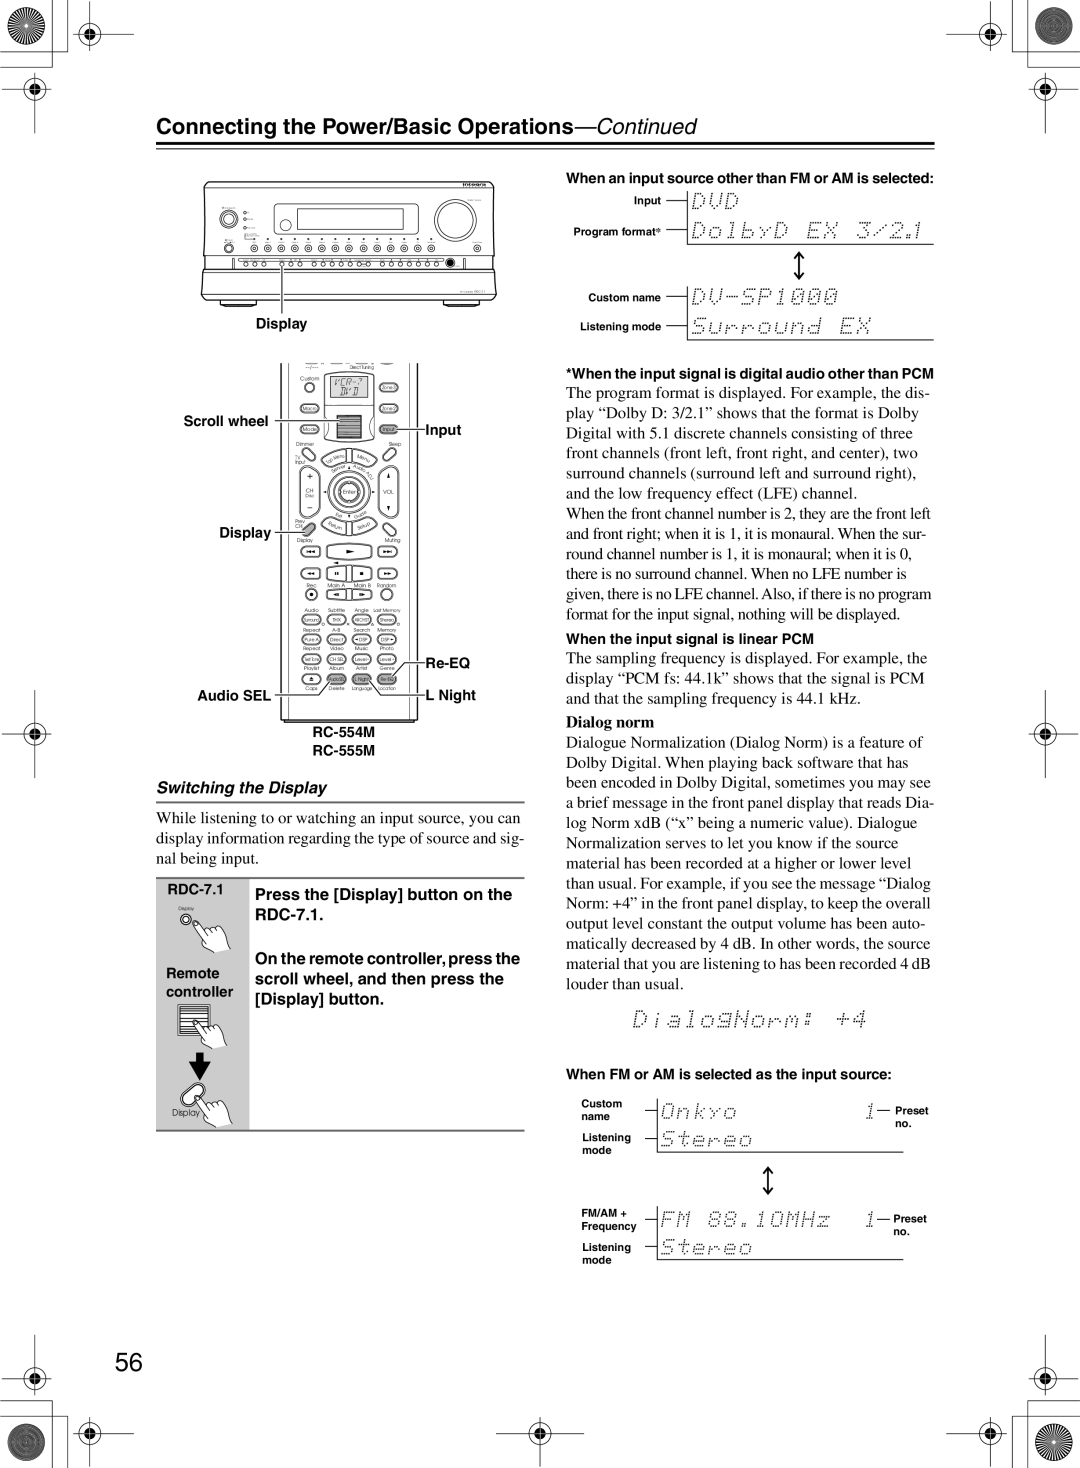 Integra RDC-7.1 instruction manual Switching the Display, Dialog norm, Connecting the Power/Basic Operations—Continued 